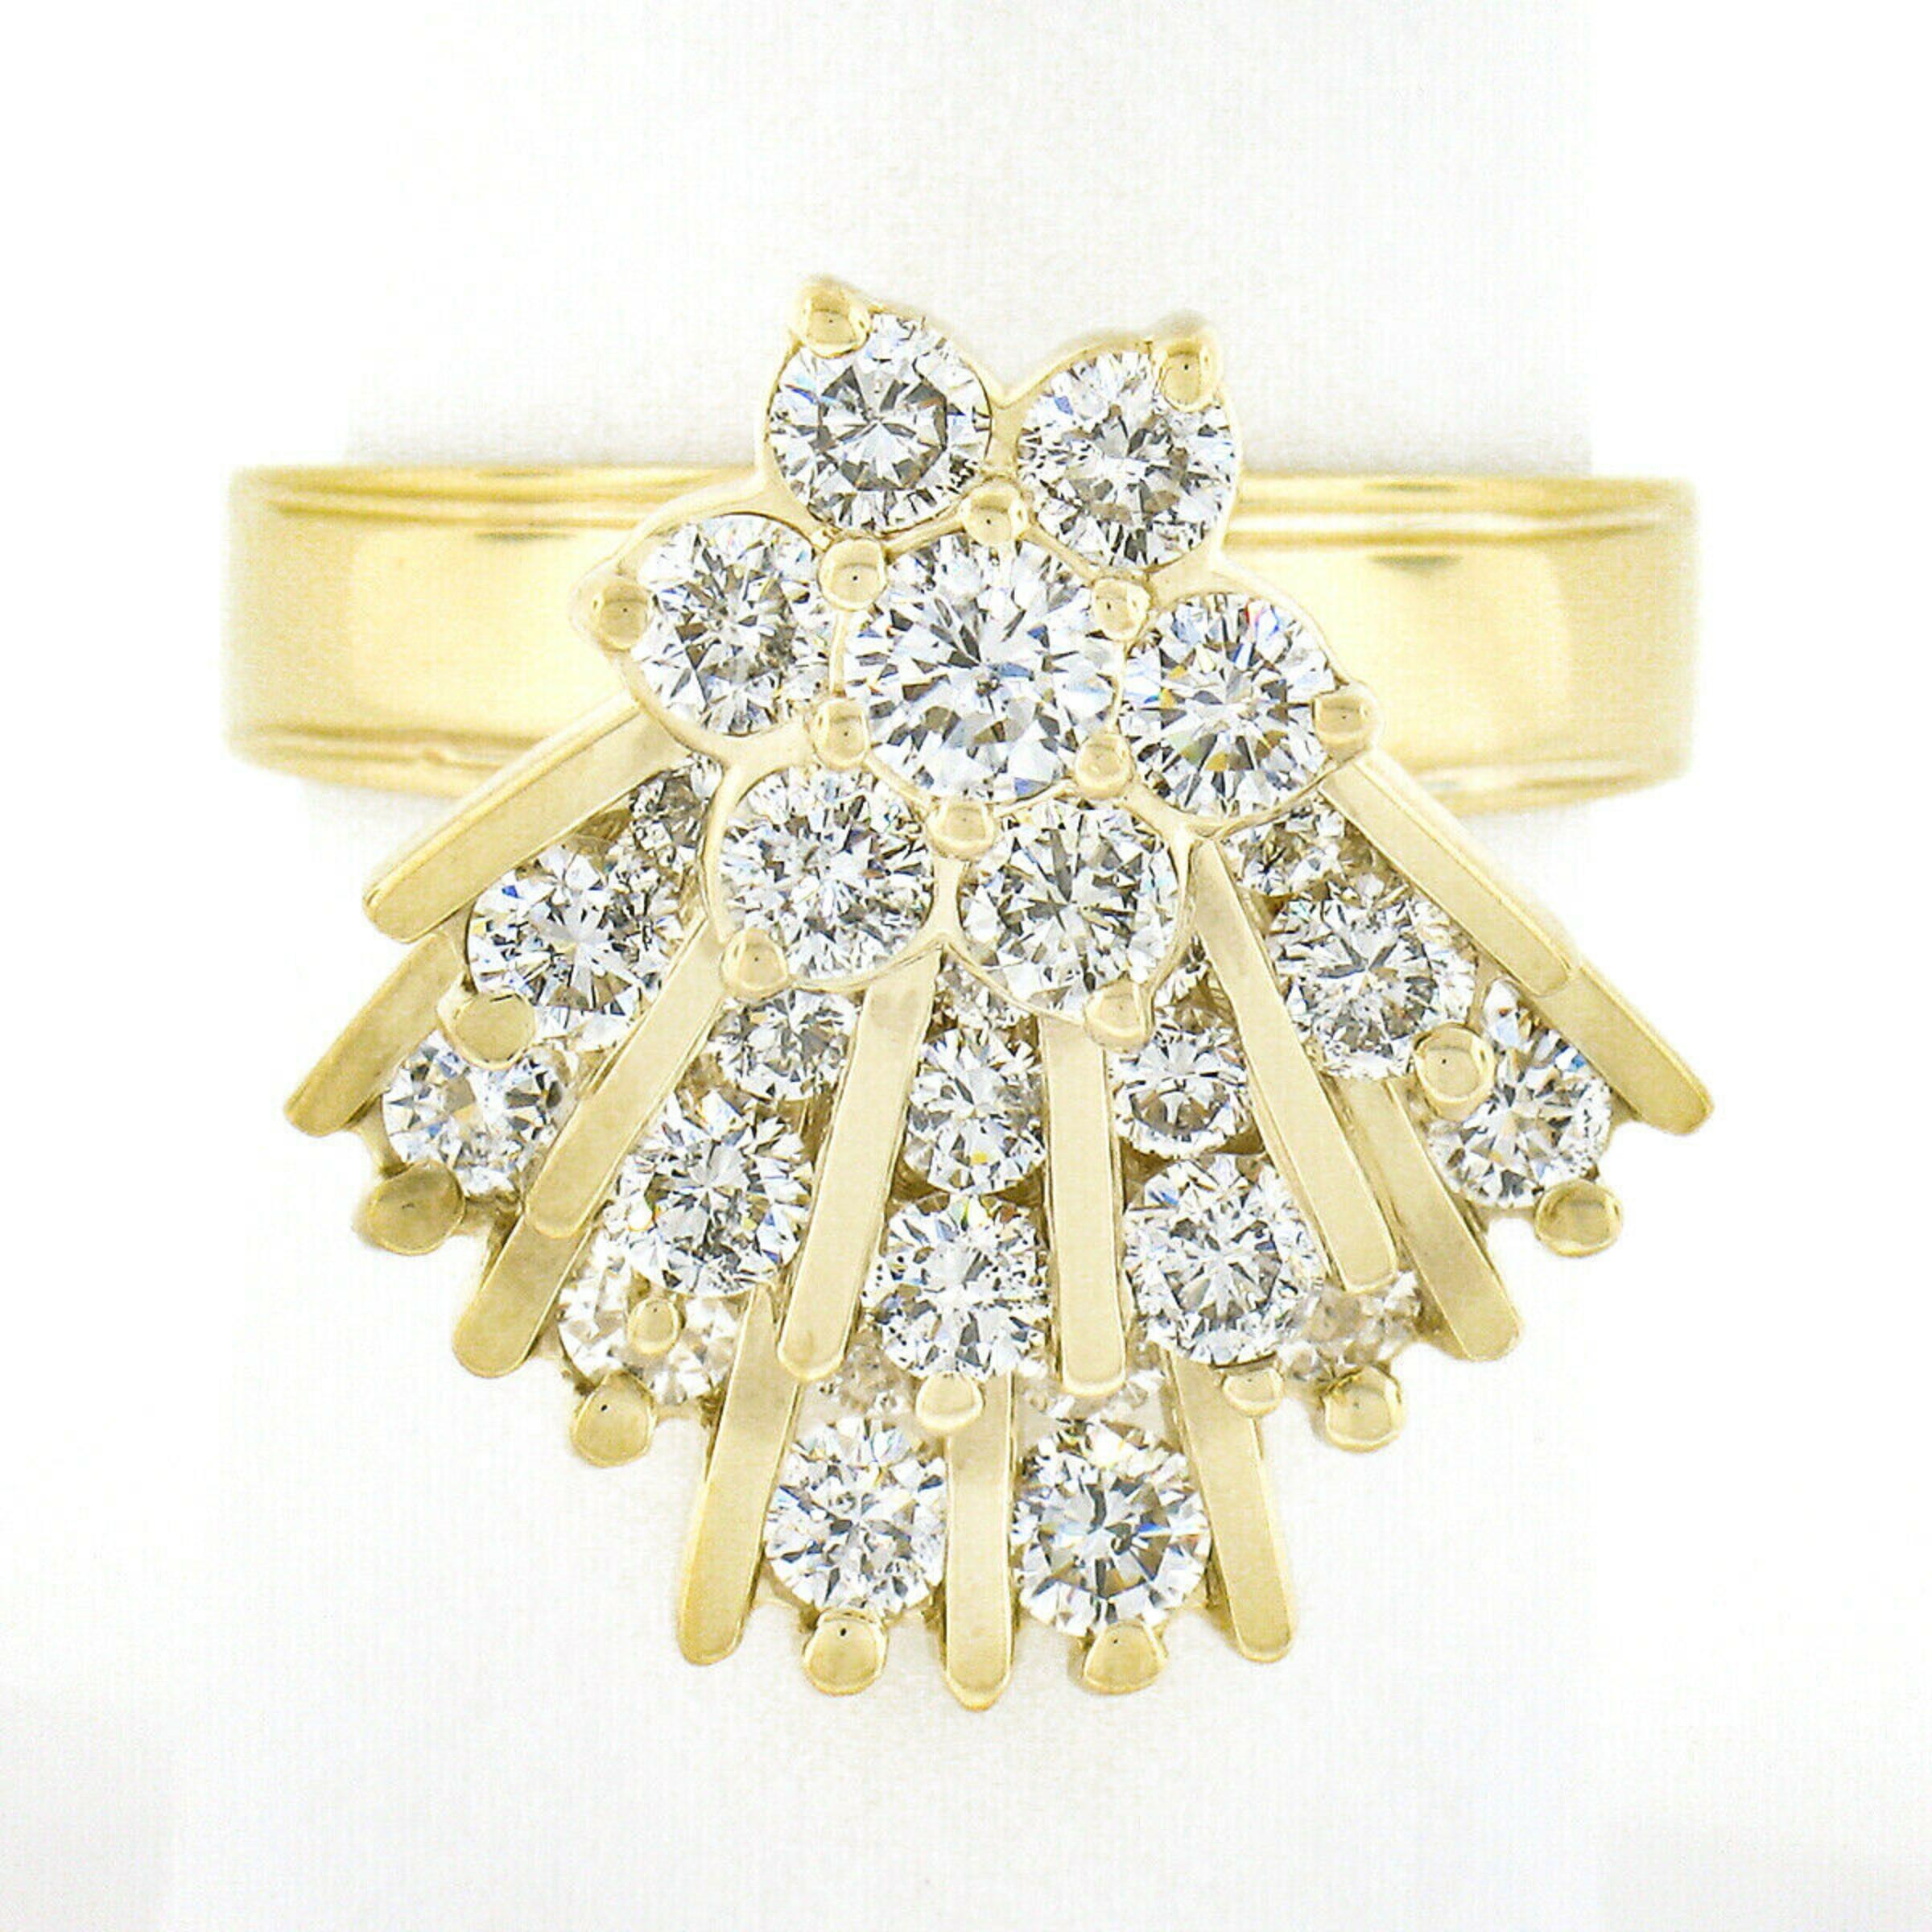 Unique 14k Gold 2.30ctw Round Diamond Spinning Fan Cluster Mobile Cocktail Ring In Excellent Condition For Sale In Montclair, NJ